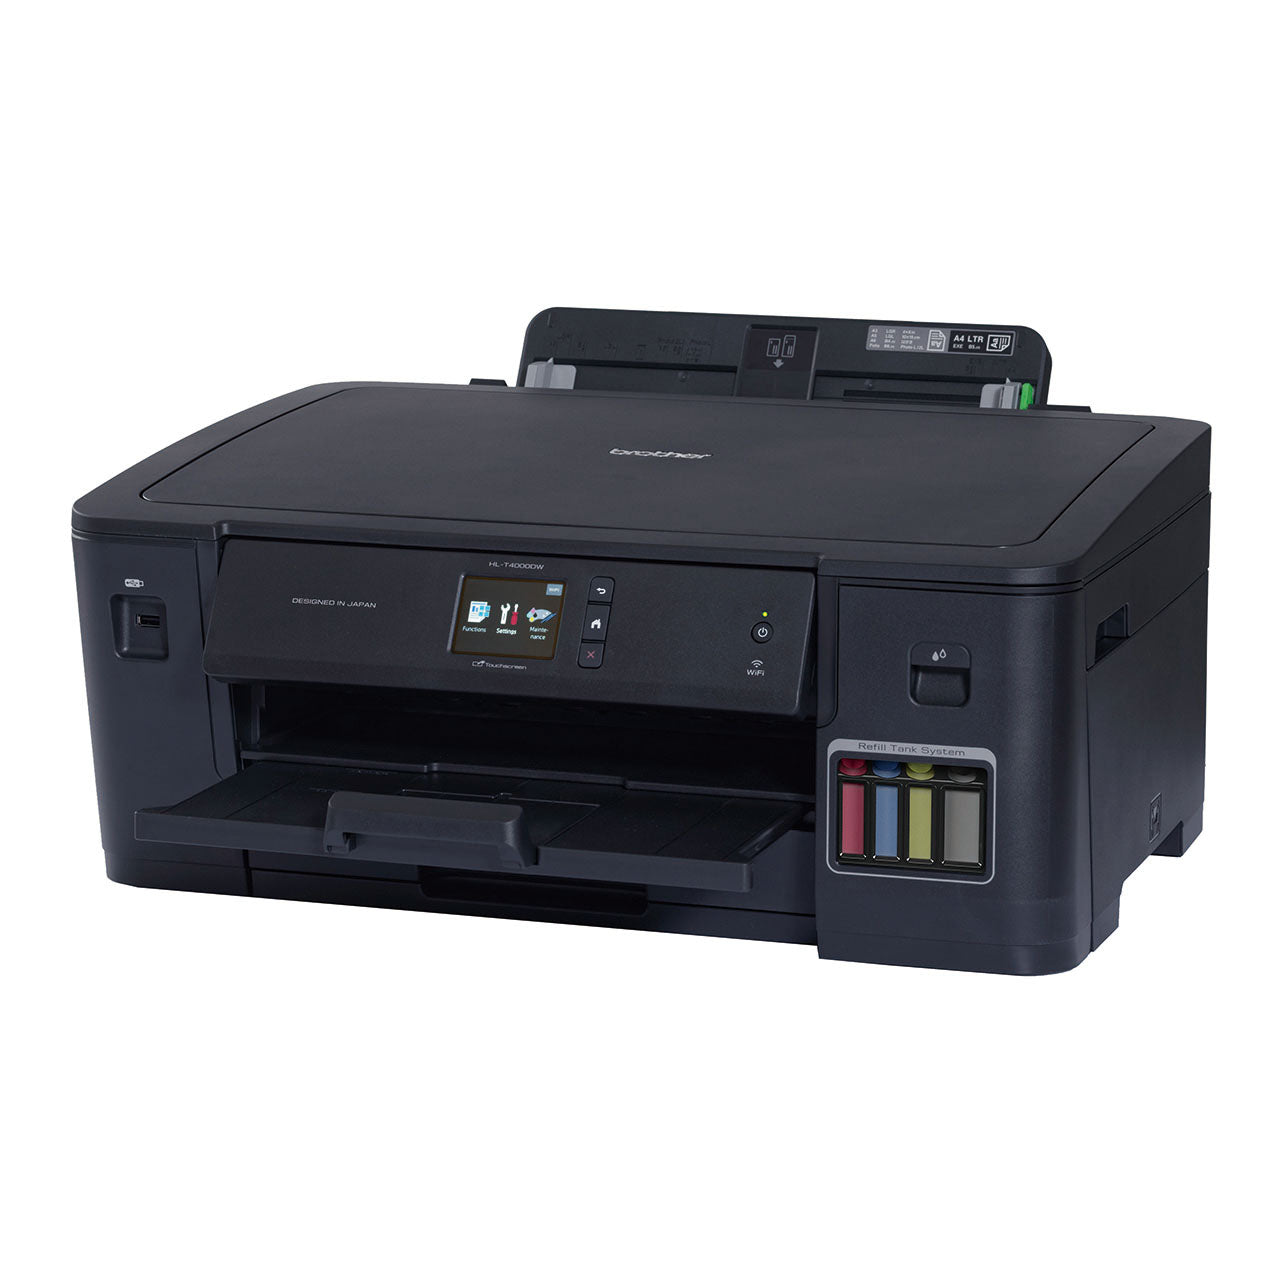 Brother Wireless & Ethernet Connectivity Ink Tank Printer